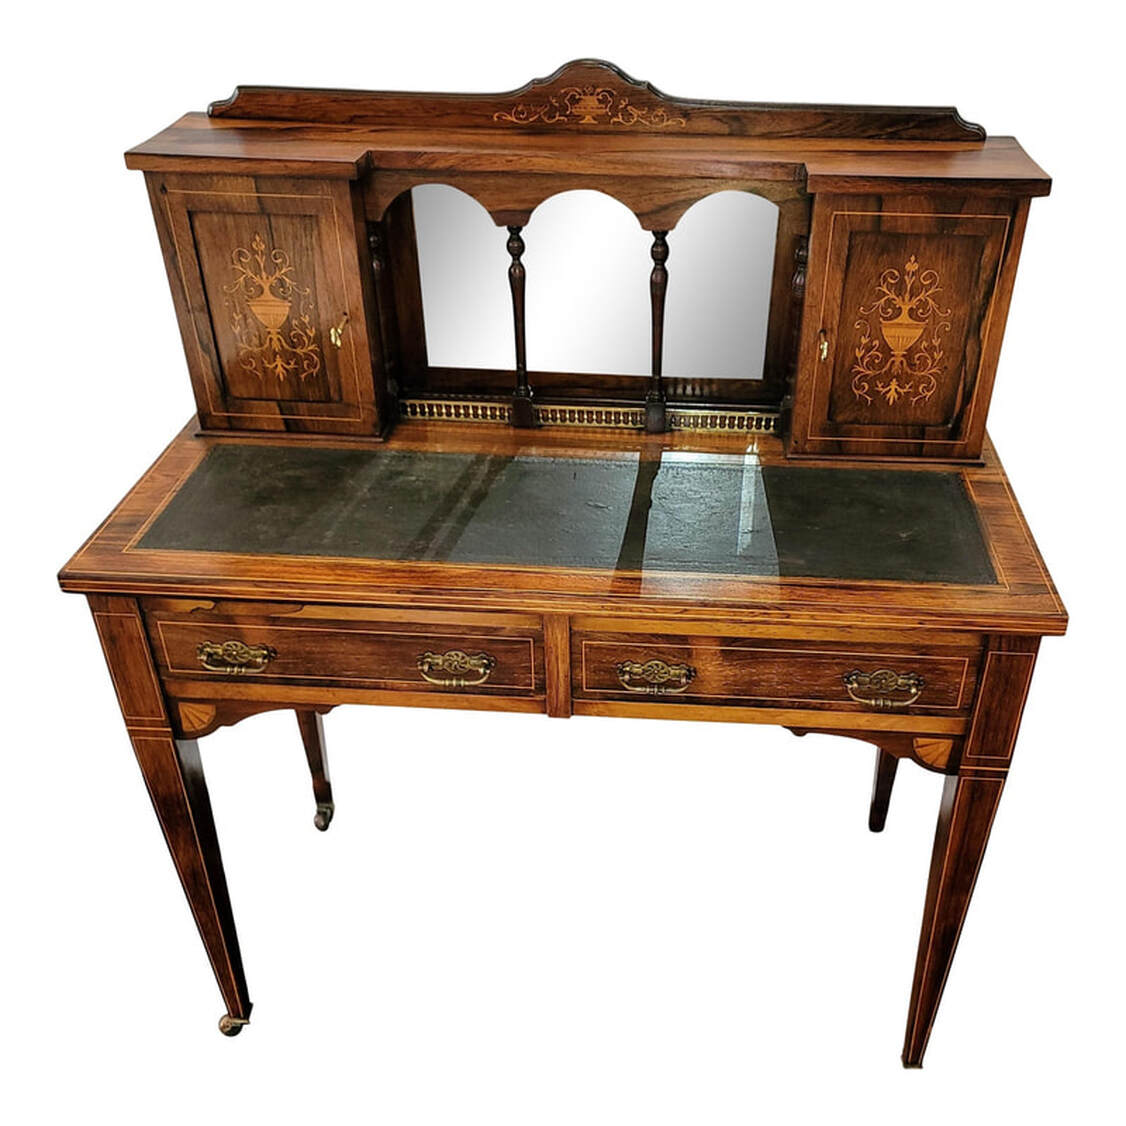 Late nineteenth century English rosewood writing table enriched with inlaid work by Maple & Company.  The curved board across the top is inlaid at the center with a satinwood urn and scrolled acanthus leaves.  The geometric shaped rosewood top rests upon two cupboards and an arcaded recess with a beveled mirror back, turned supports, and brass gallery.  The cabinet doors are inlaid with satinwood urns and acanthus arabesques. The doors lock and come with keys. The left cabinet interior features two standard shelves and the right cabinet interior features three vertical pigeon holes for correspondence.  The writing surface is inset with black leather embossed on the edges with a Greek key motif.  Below the writing surface are two frieze drawers constructed with fine hand-cut dovetailing and hand-planed bottoms. The drawer pulls are a bail type on geometric Aesthetic Movement pierced and chased brass scutcheons.  The square tapered legs end in brass casters.  Inlaid satinwood banding accents the cabinet doors, the writing surface, the drawer fronts, the legs, and the desk edges.  This model of writing table was sold by Maple & Company, England and was featured in their catalogue from 1885 to 1895.